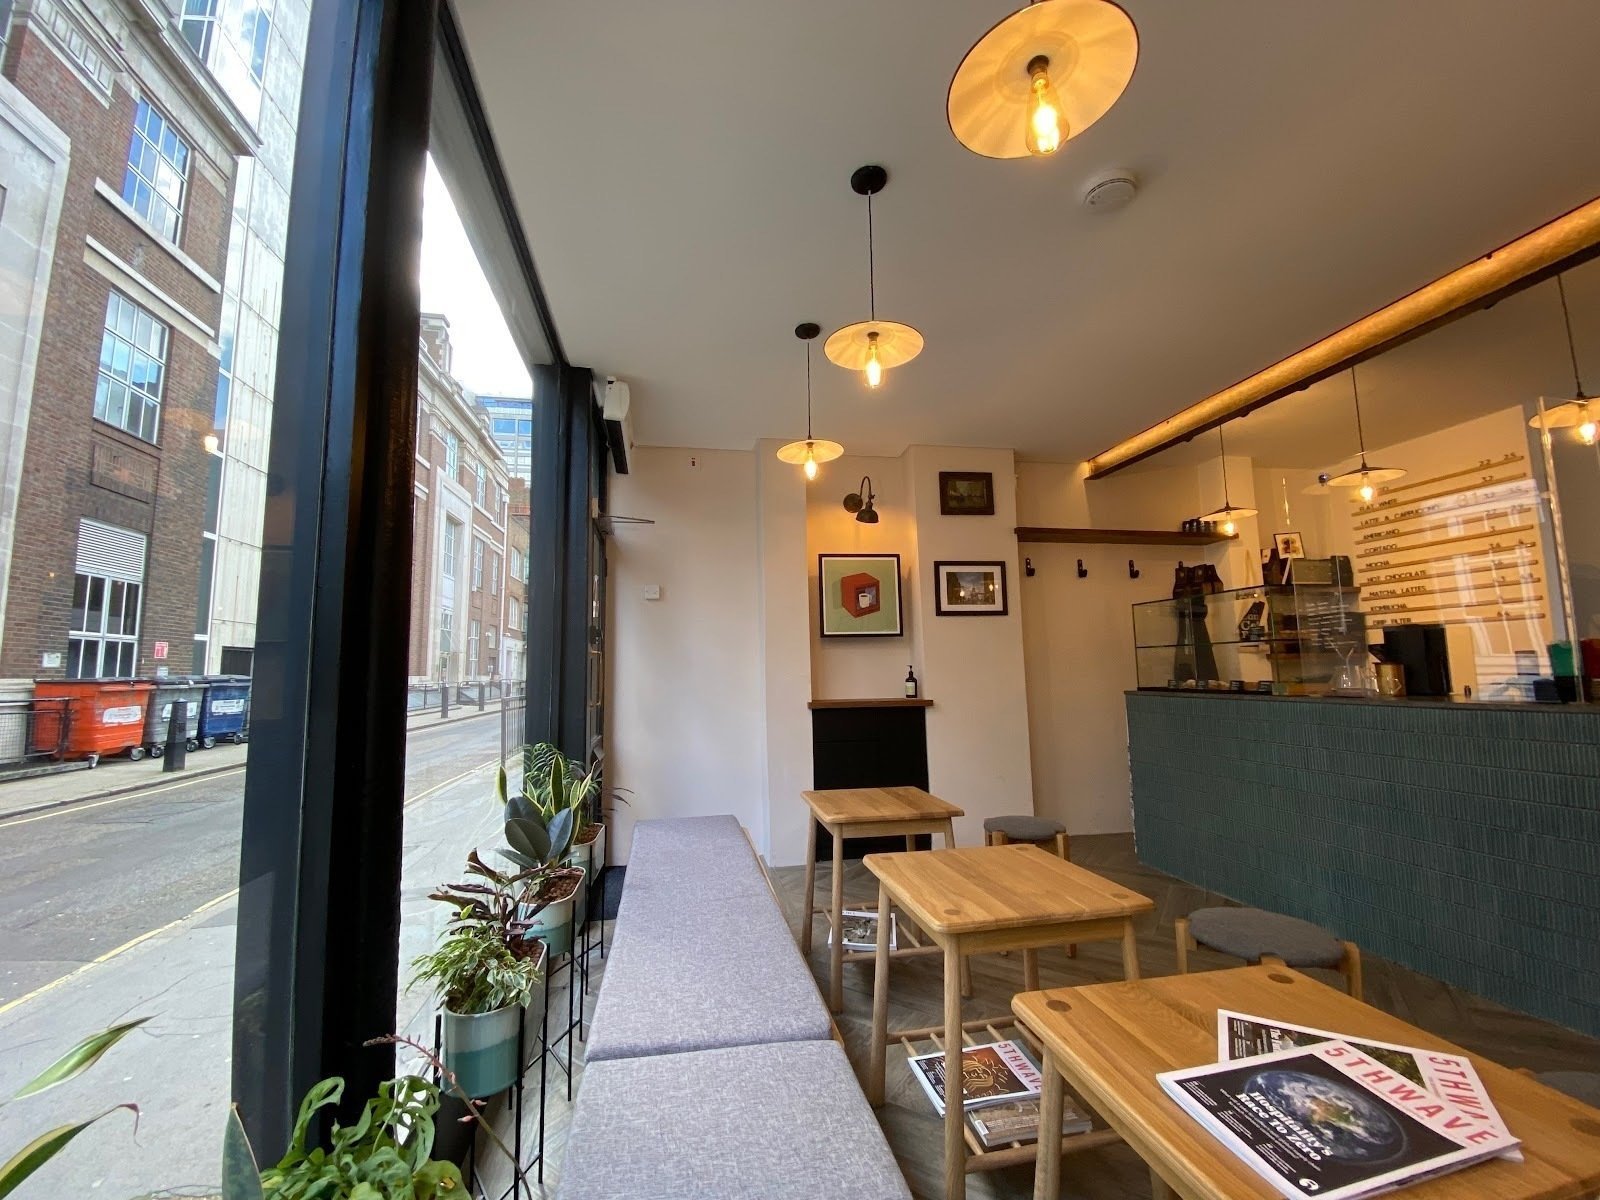 <span class="translation_missing" title="translation missing: en.meta.location_title, location_name: Archetype Coffee, city: London">Location Title</span>